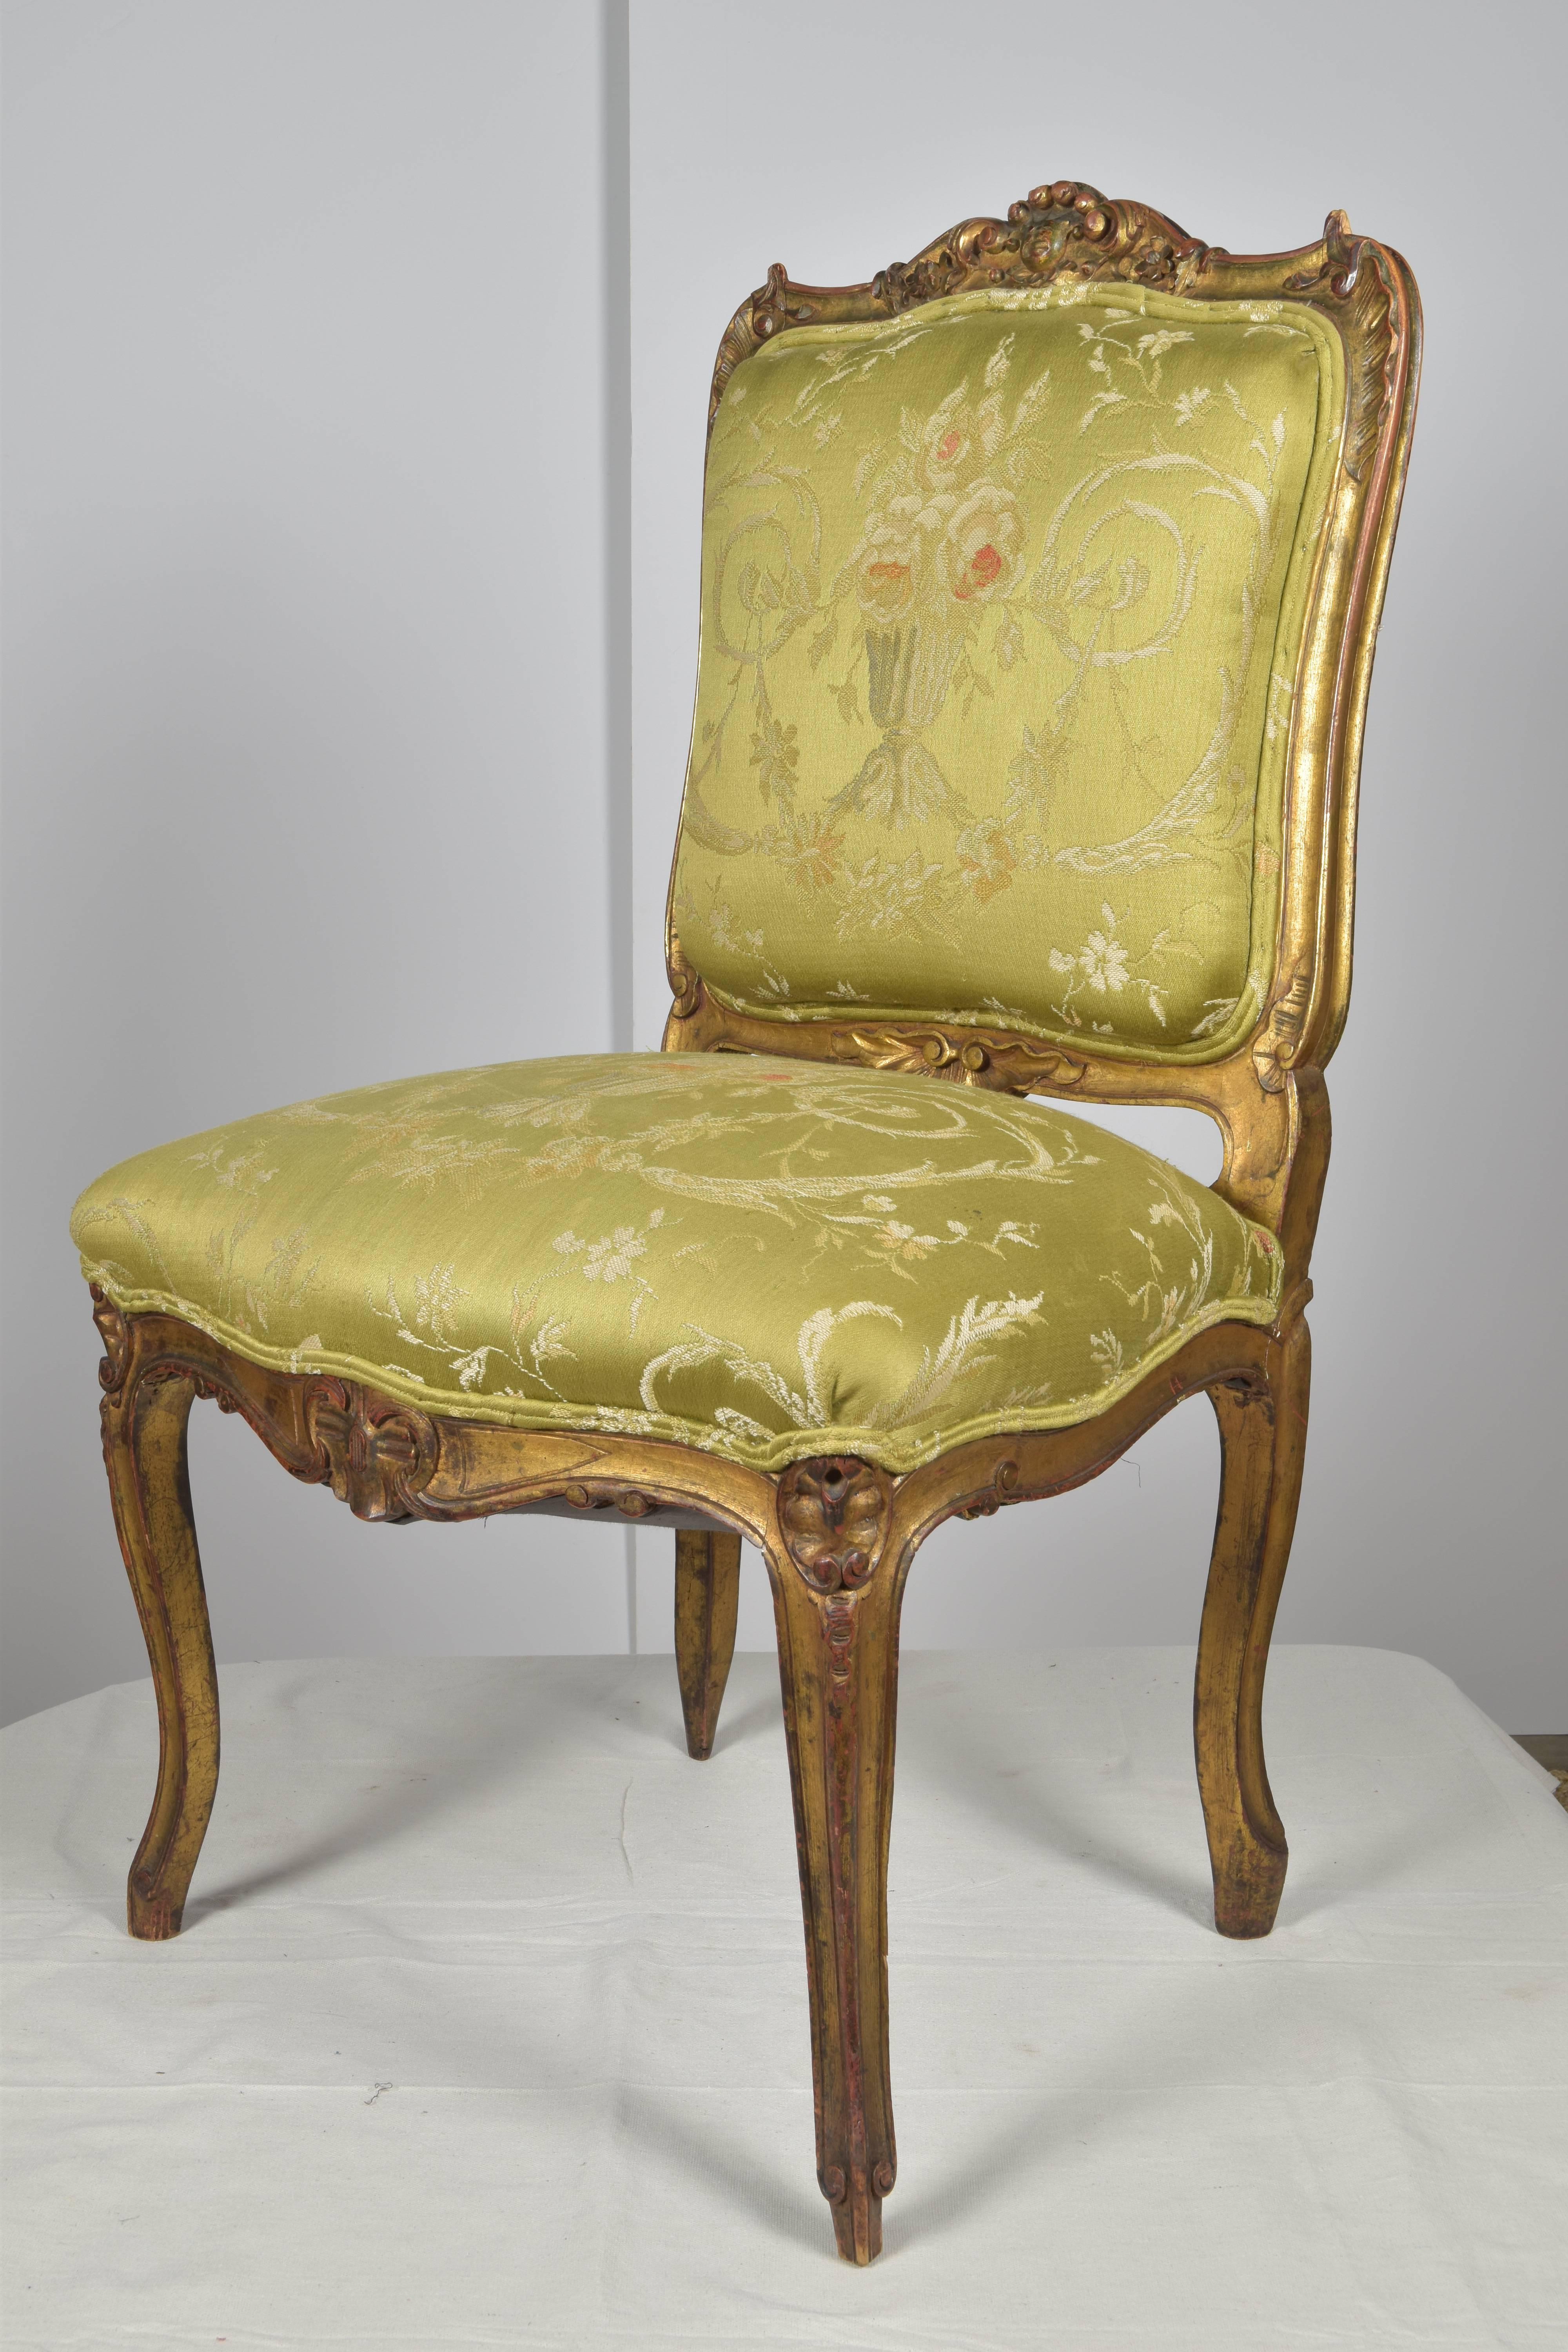 Lovely 19th century carved giltwood chair with carved flower and leaf and gently curved cabriole legs. Vintage green silk upholstery. Would be a lovely desk or vanity chair.